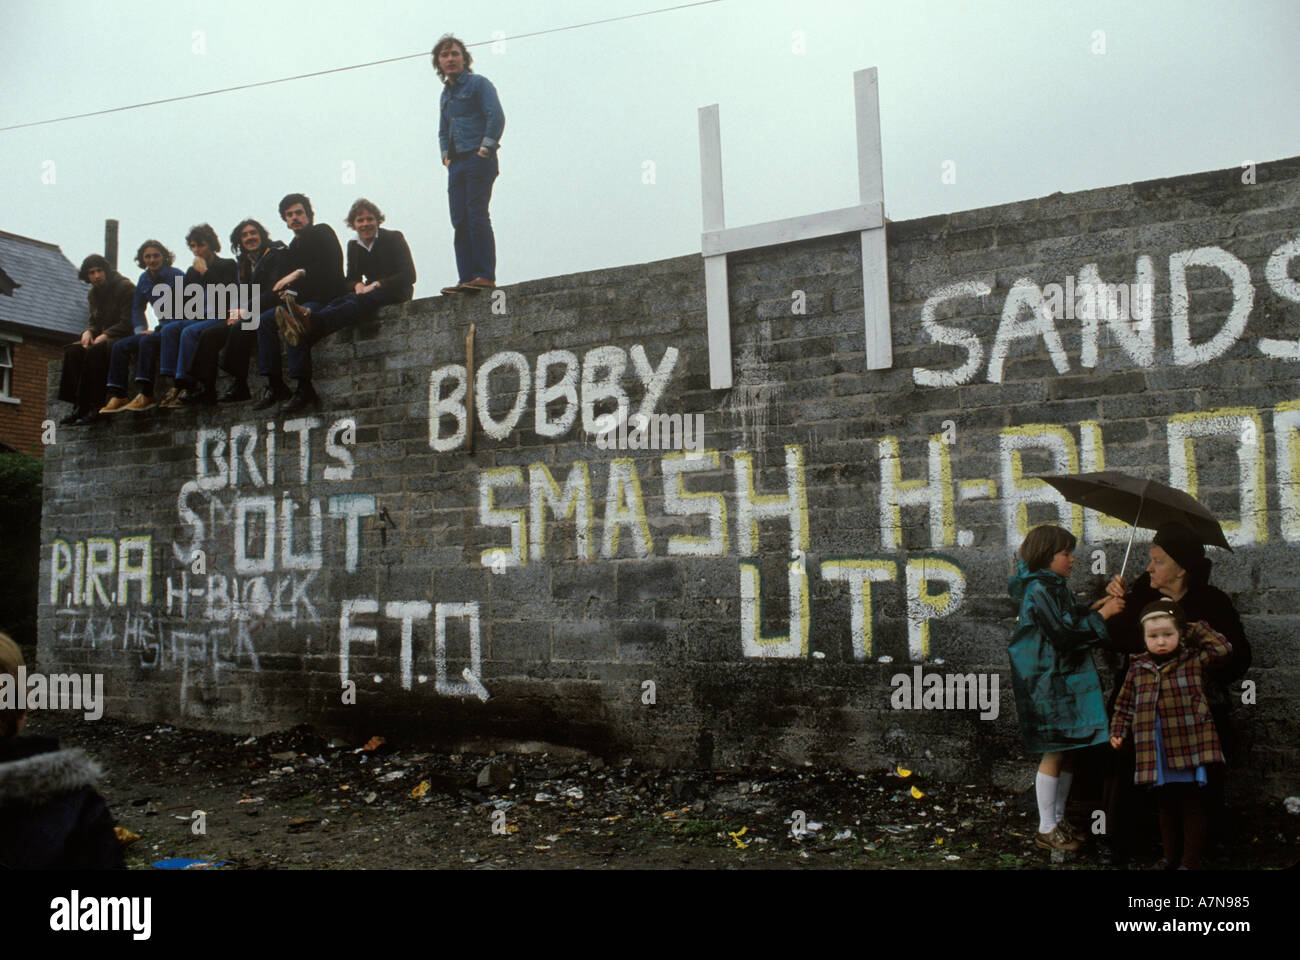 Bobby Sands Smash H Block Wall painting Belfast Northern Ireland The Troubles 1980s 1981 Britain UK HOMER SYKES Stock Photo